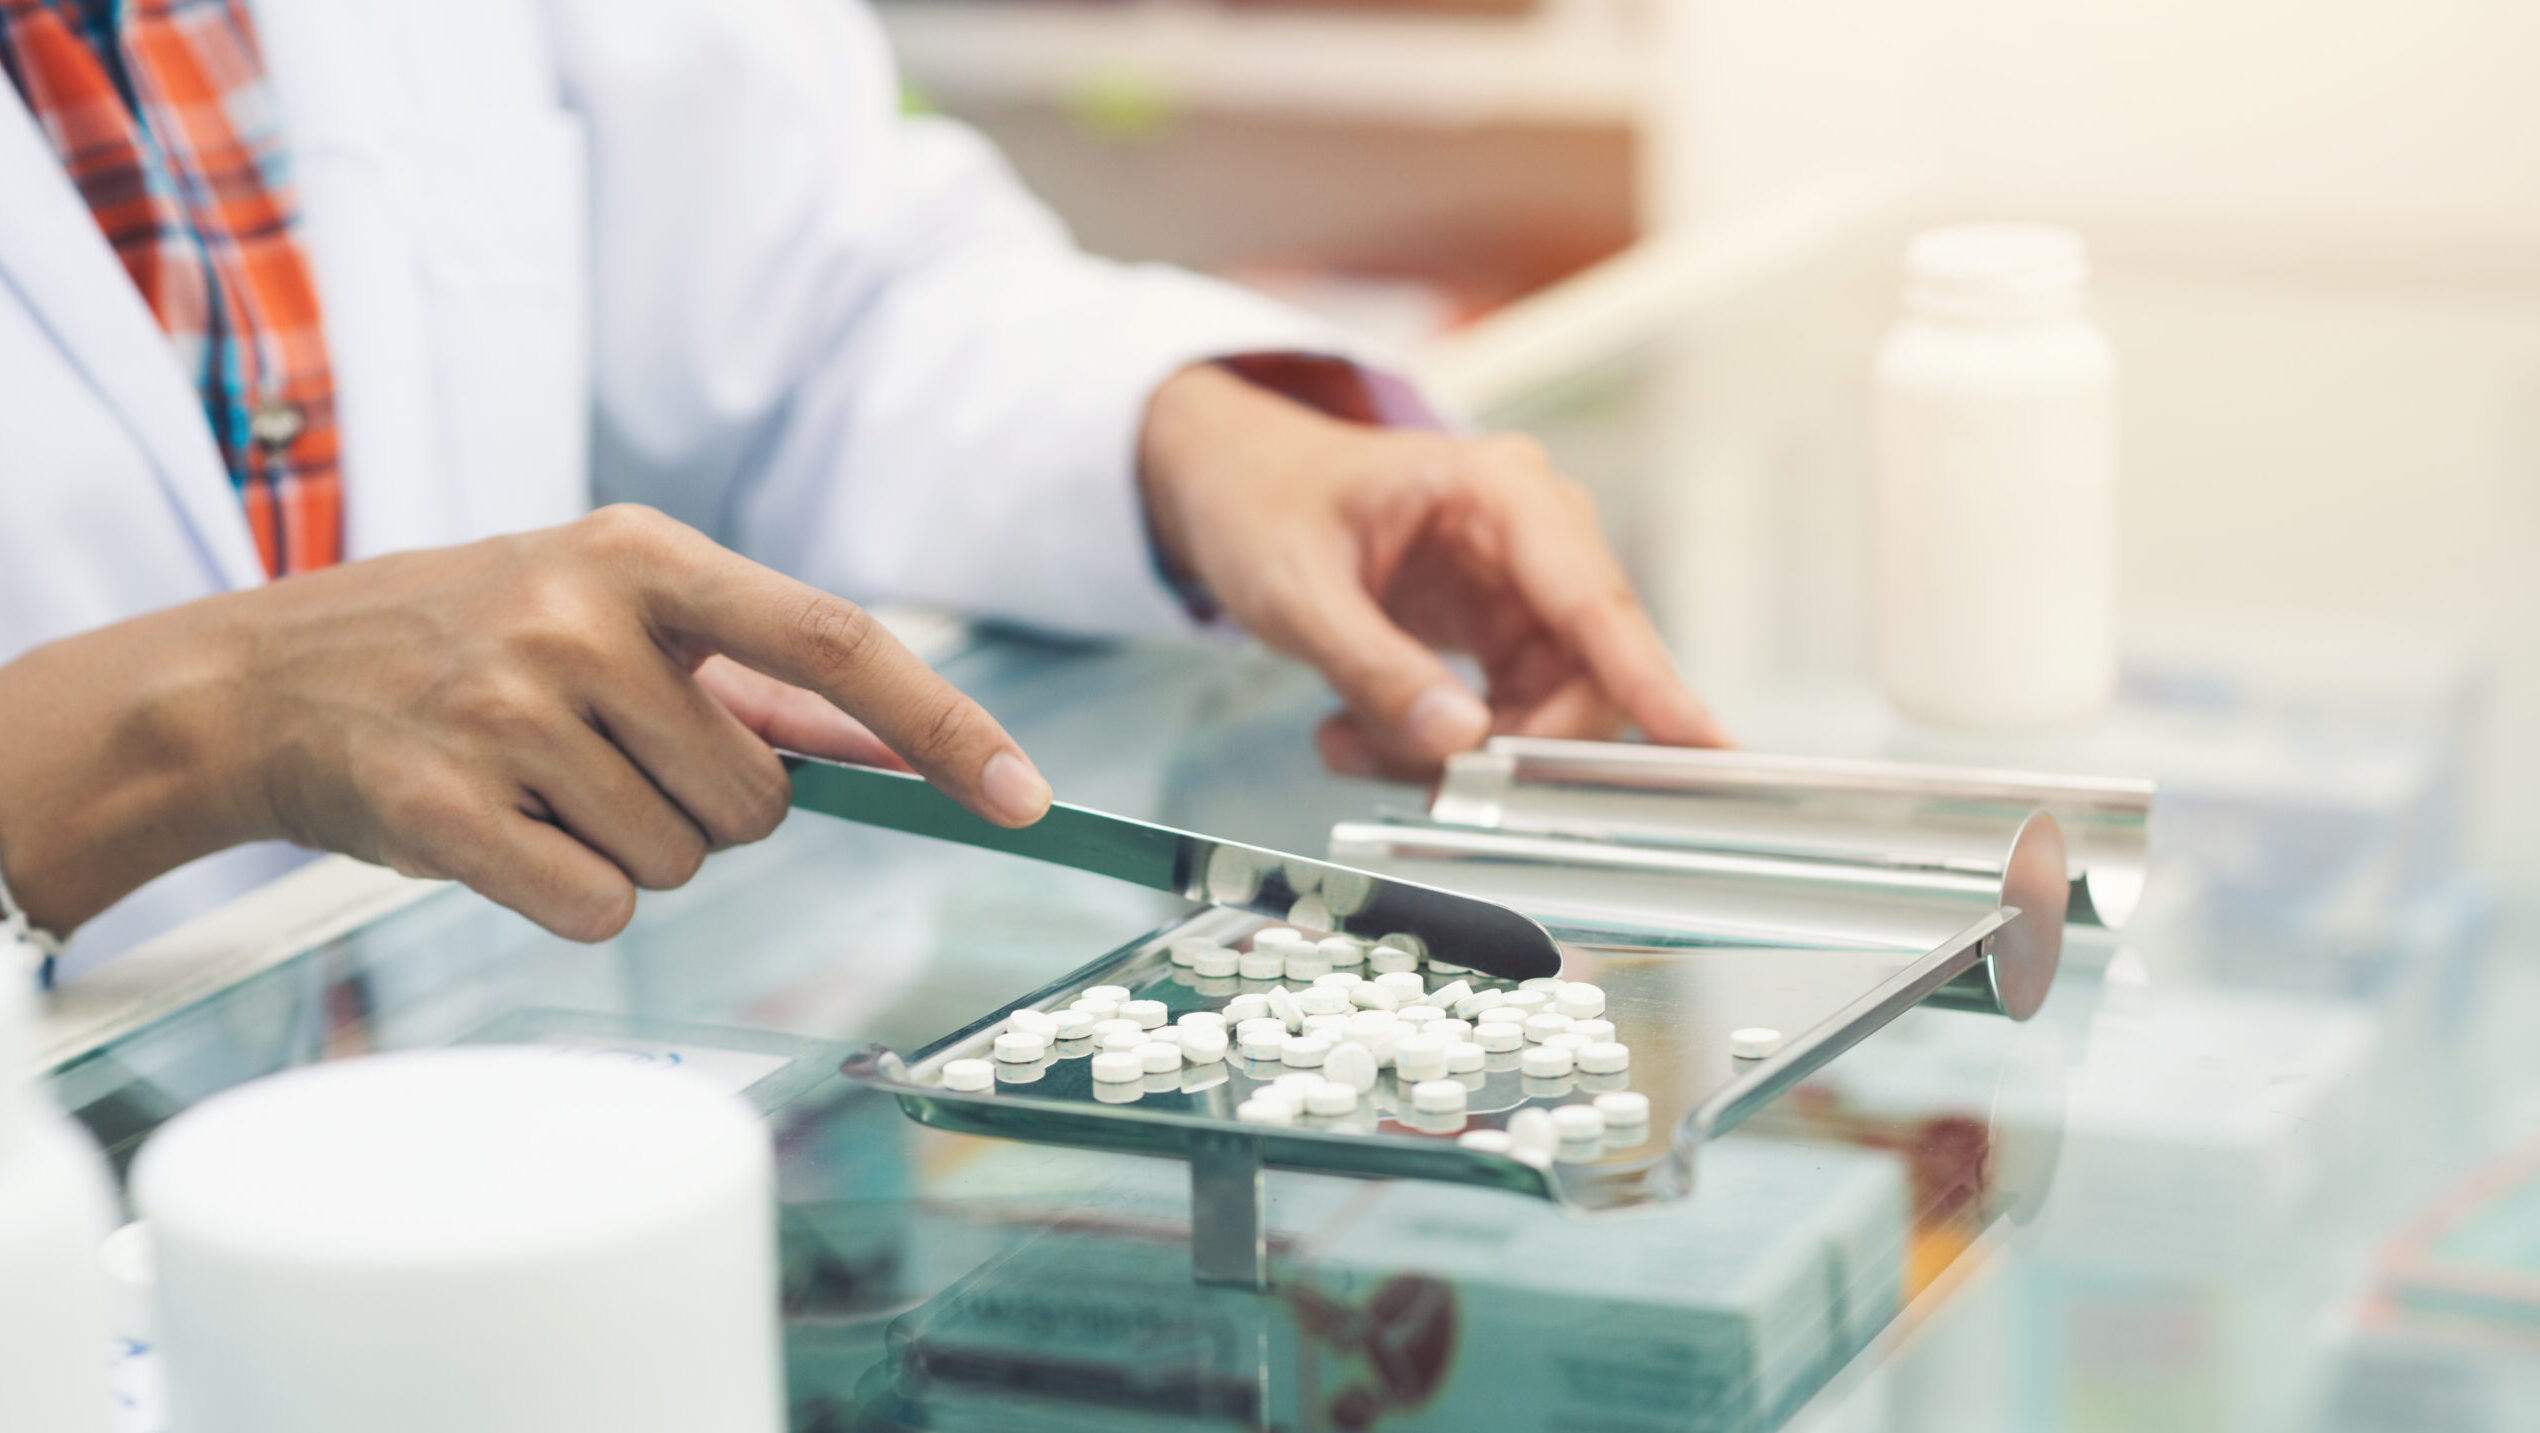 A pharmacist wearing a white coat counts pills on a metal tray.